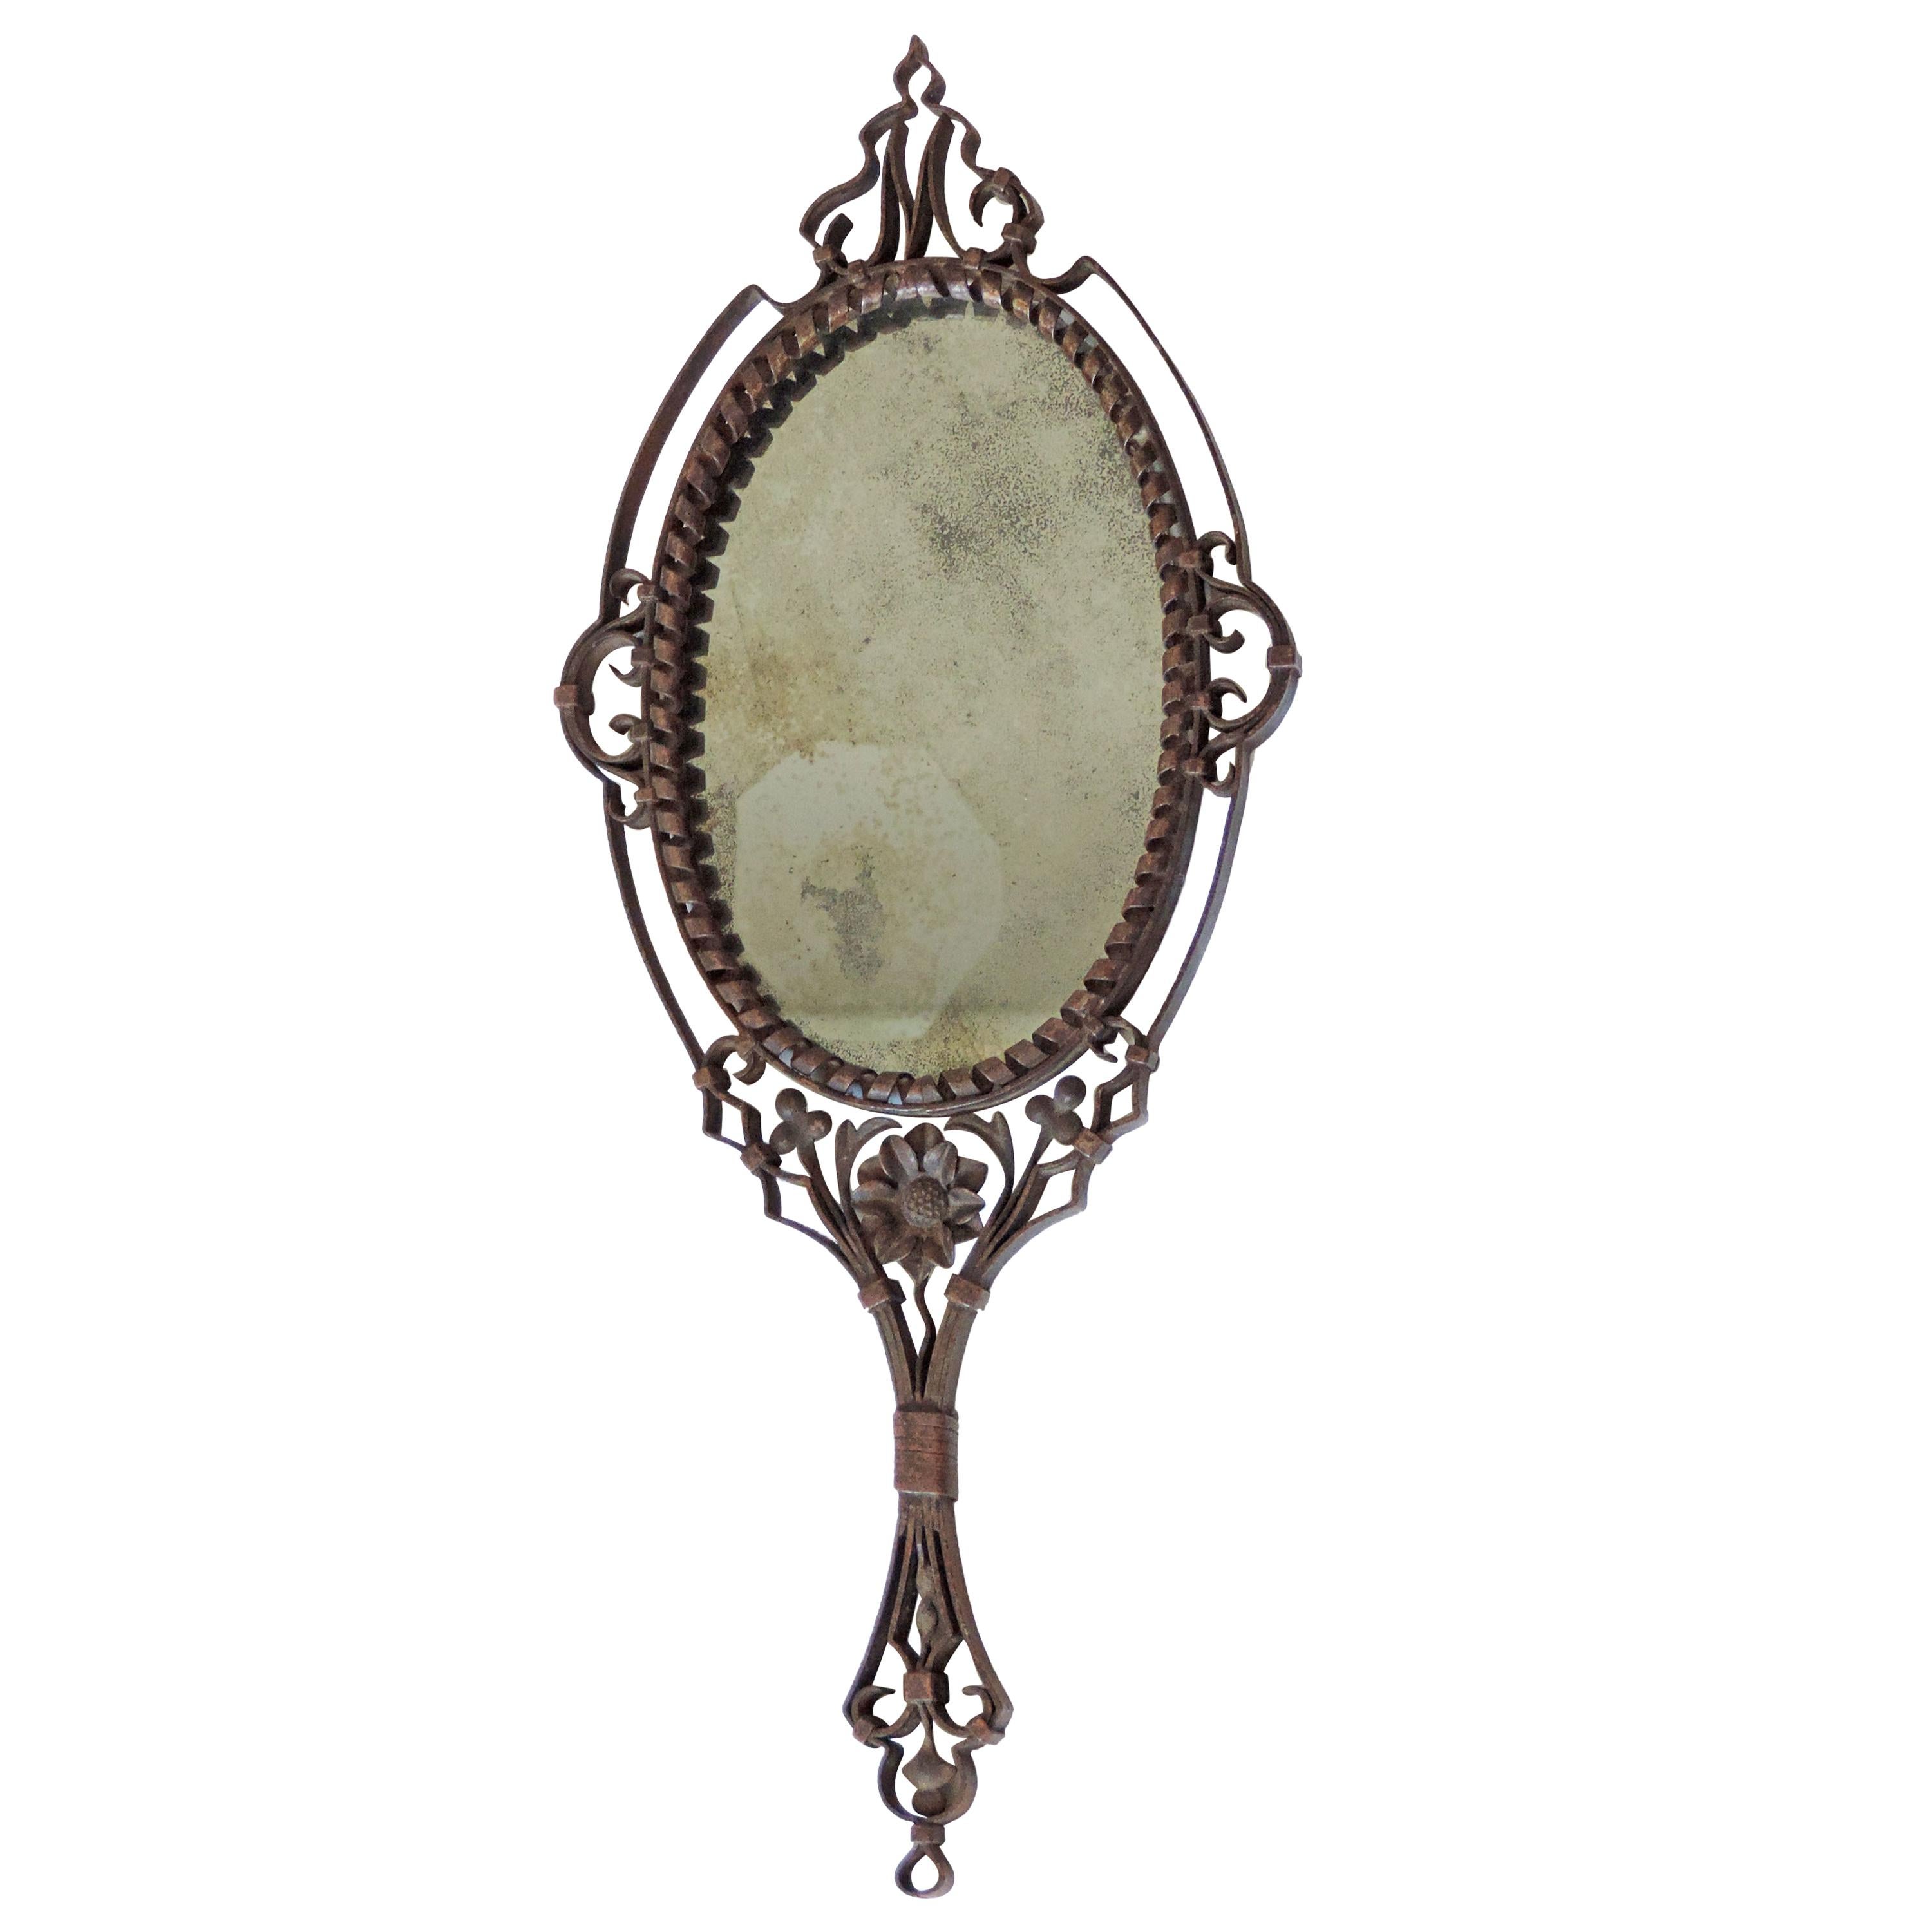 Intricate Italian Iron Hand Mirror with M Initial, 1920s For Sale